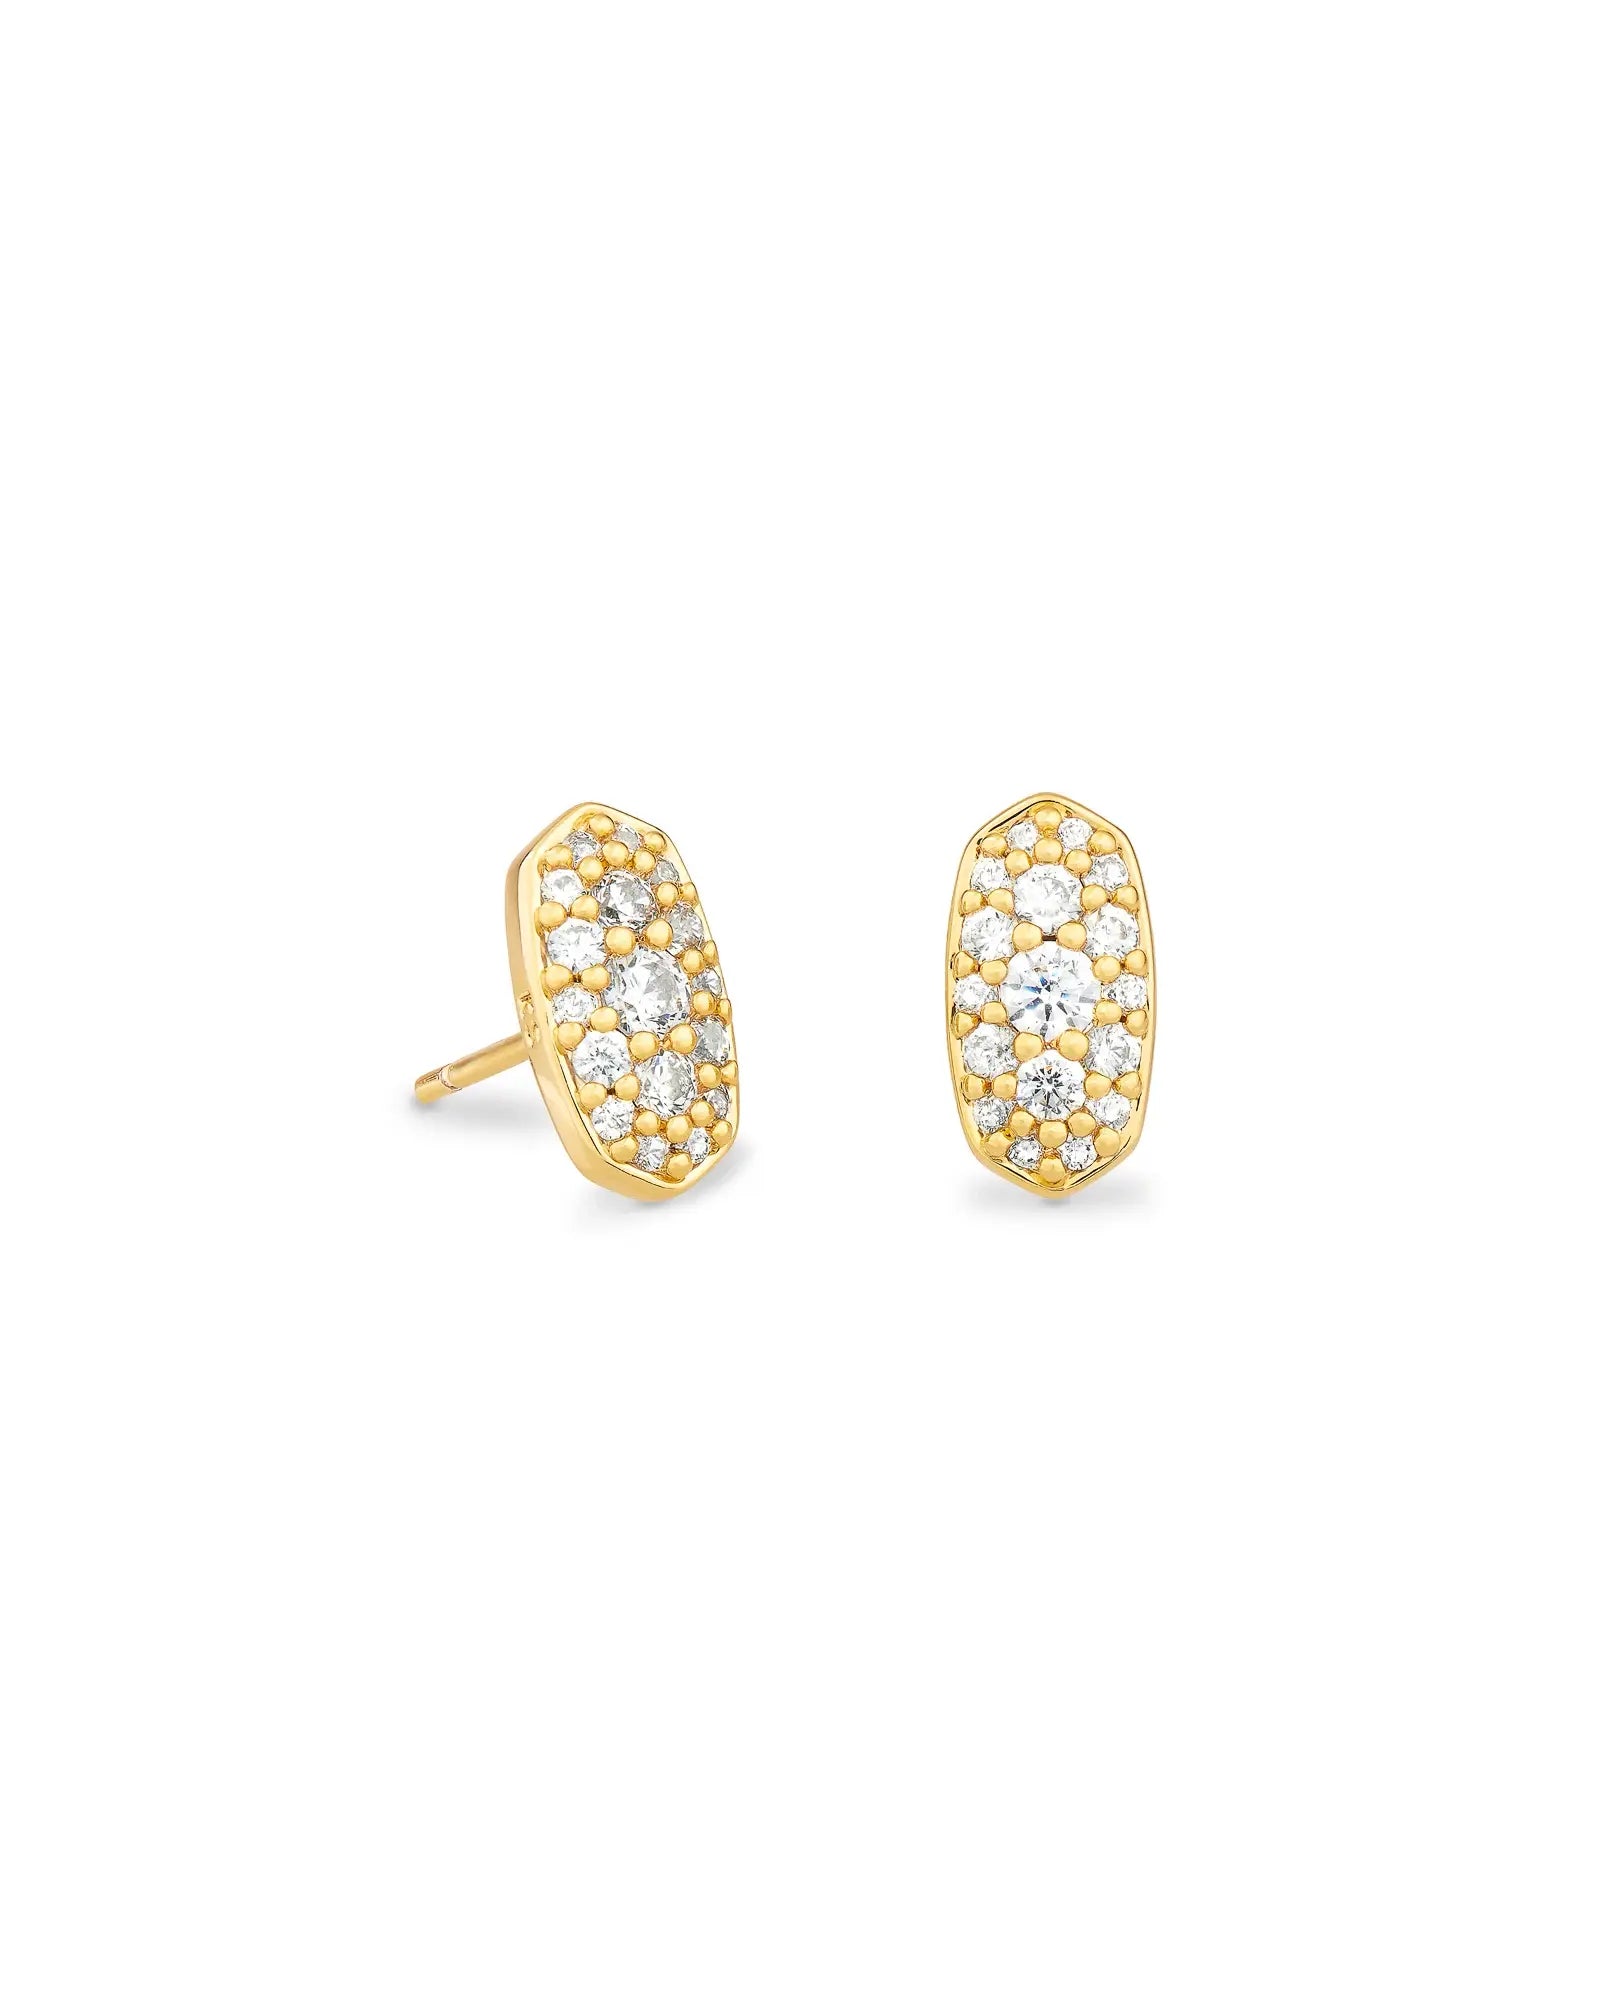 Grayson Crystal Stud Earrings Gold White CZ Front View